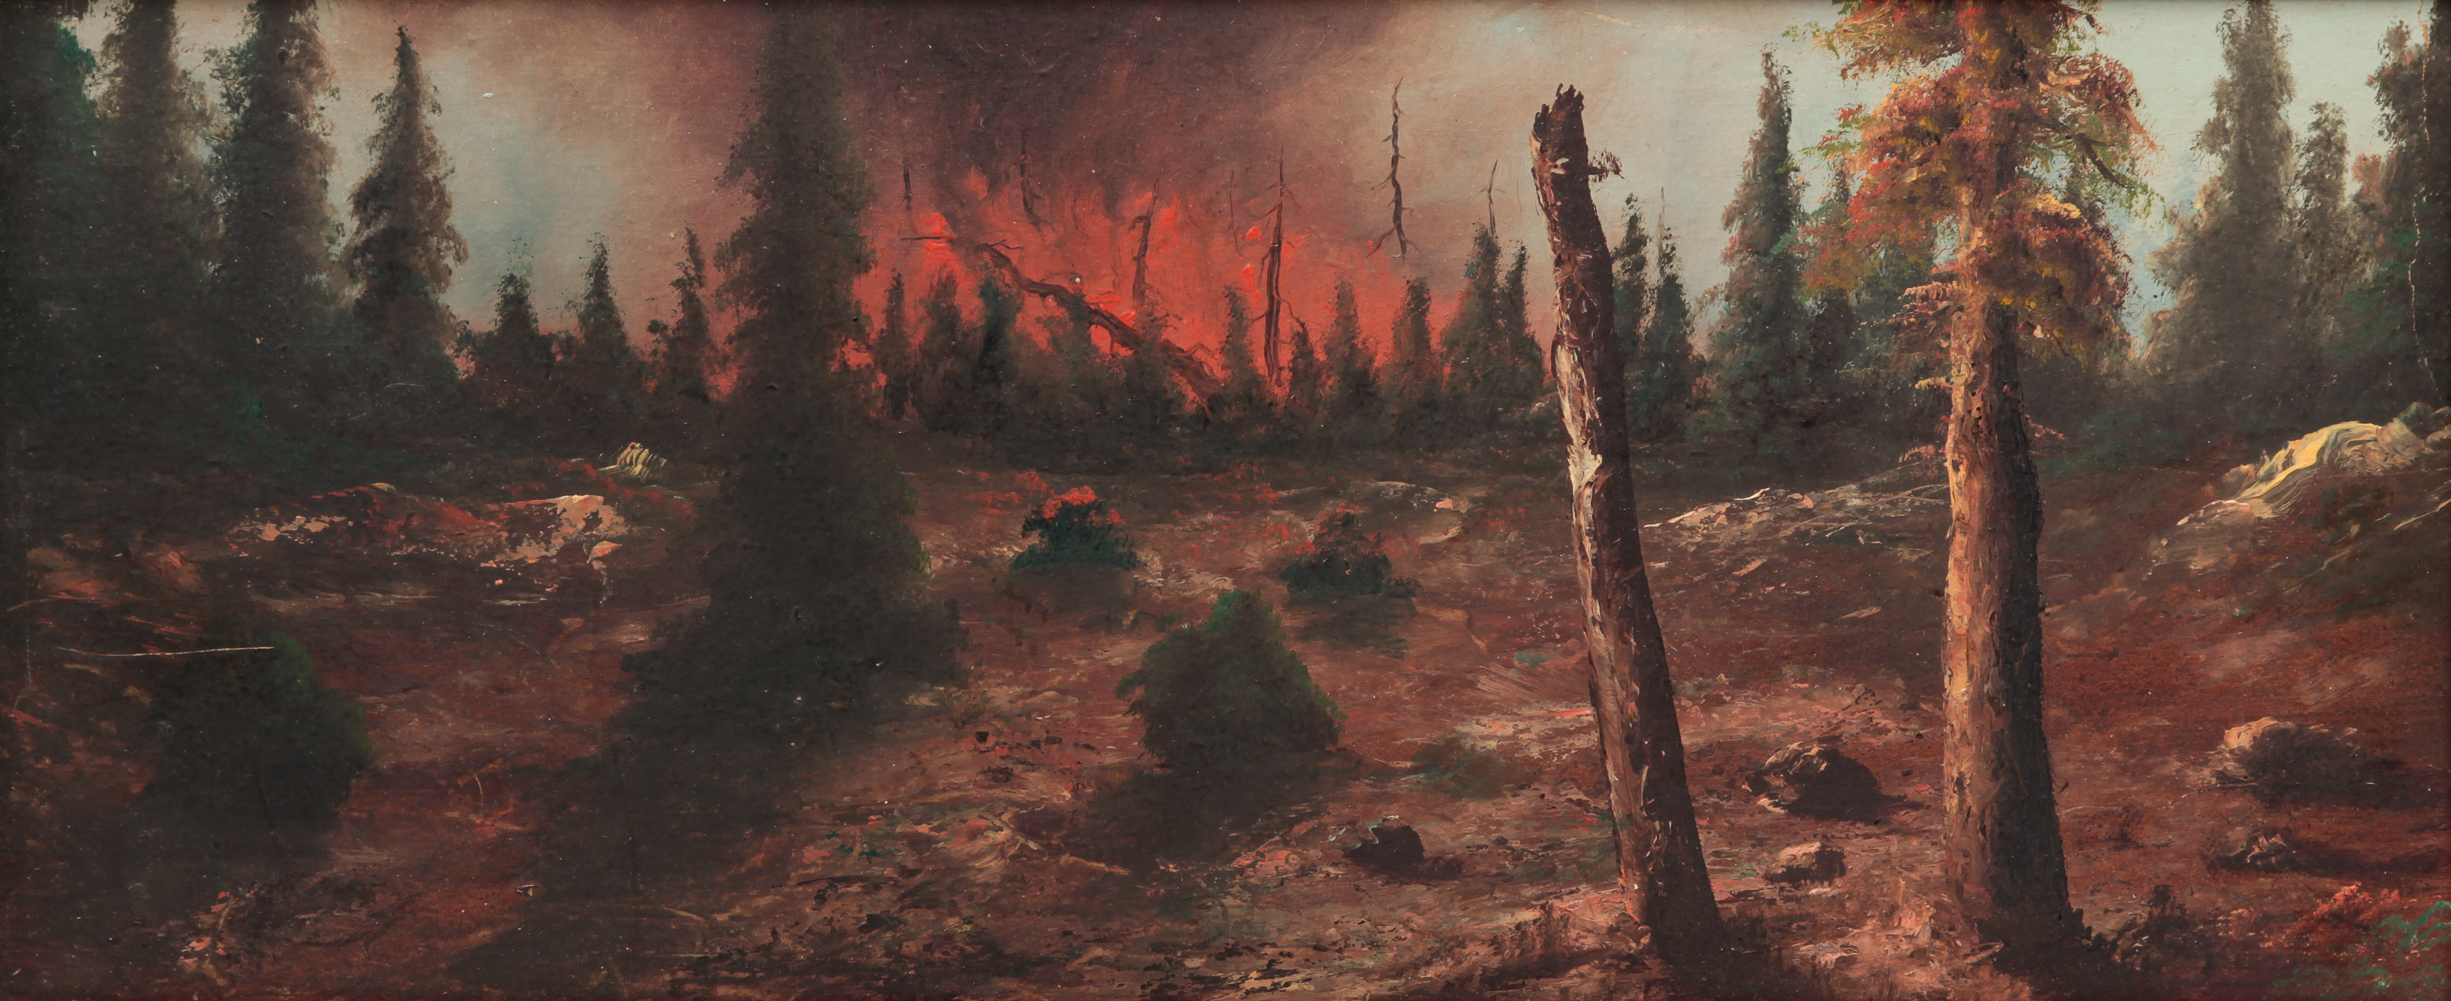 PAINTING OF A FOREST FIRE. American